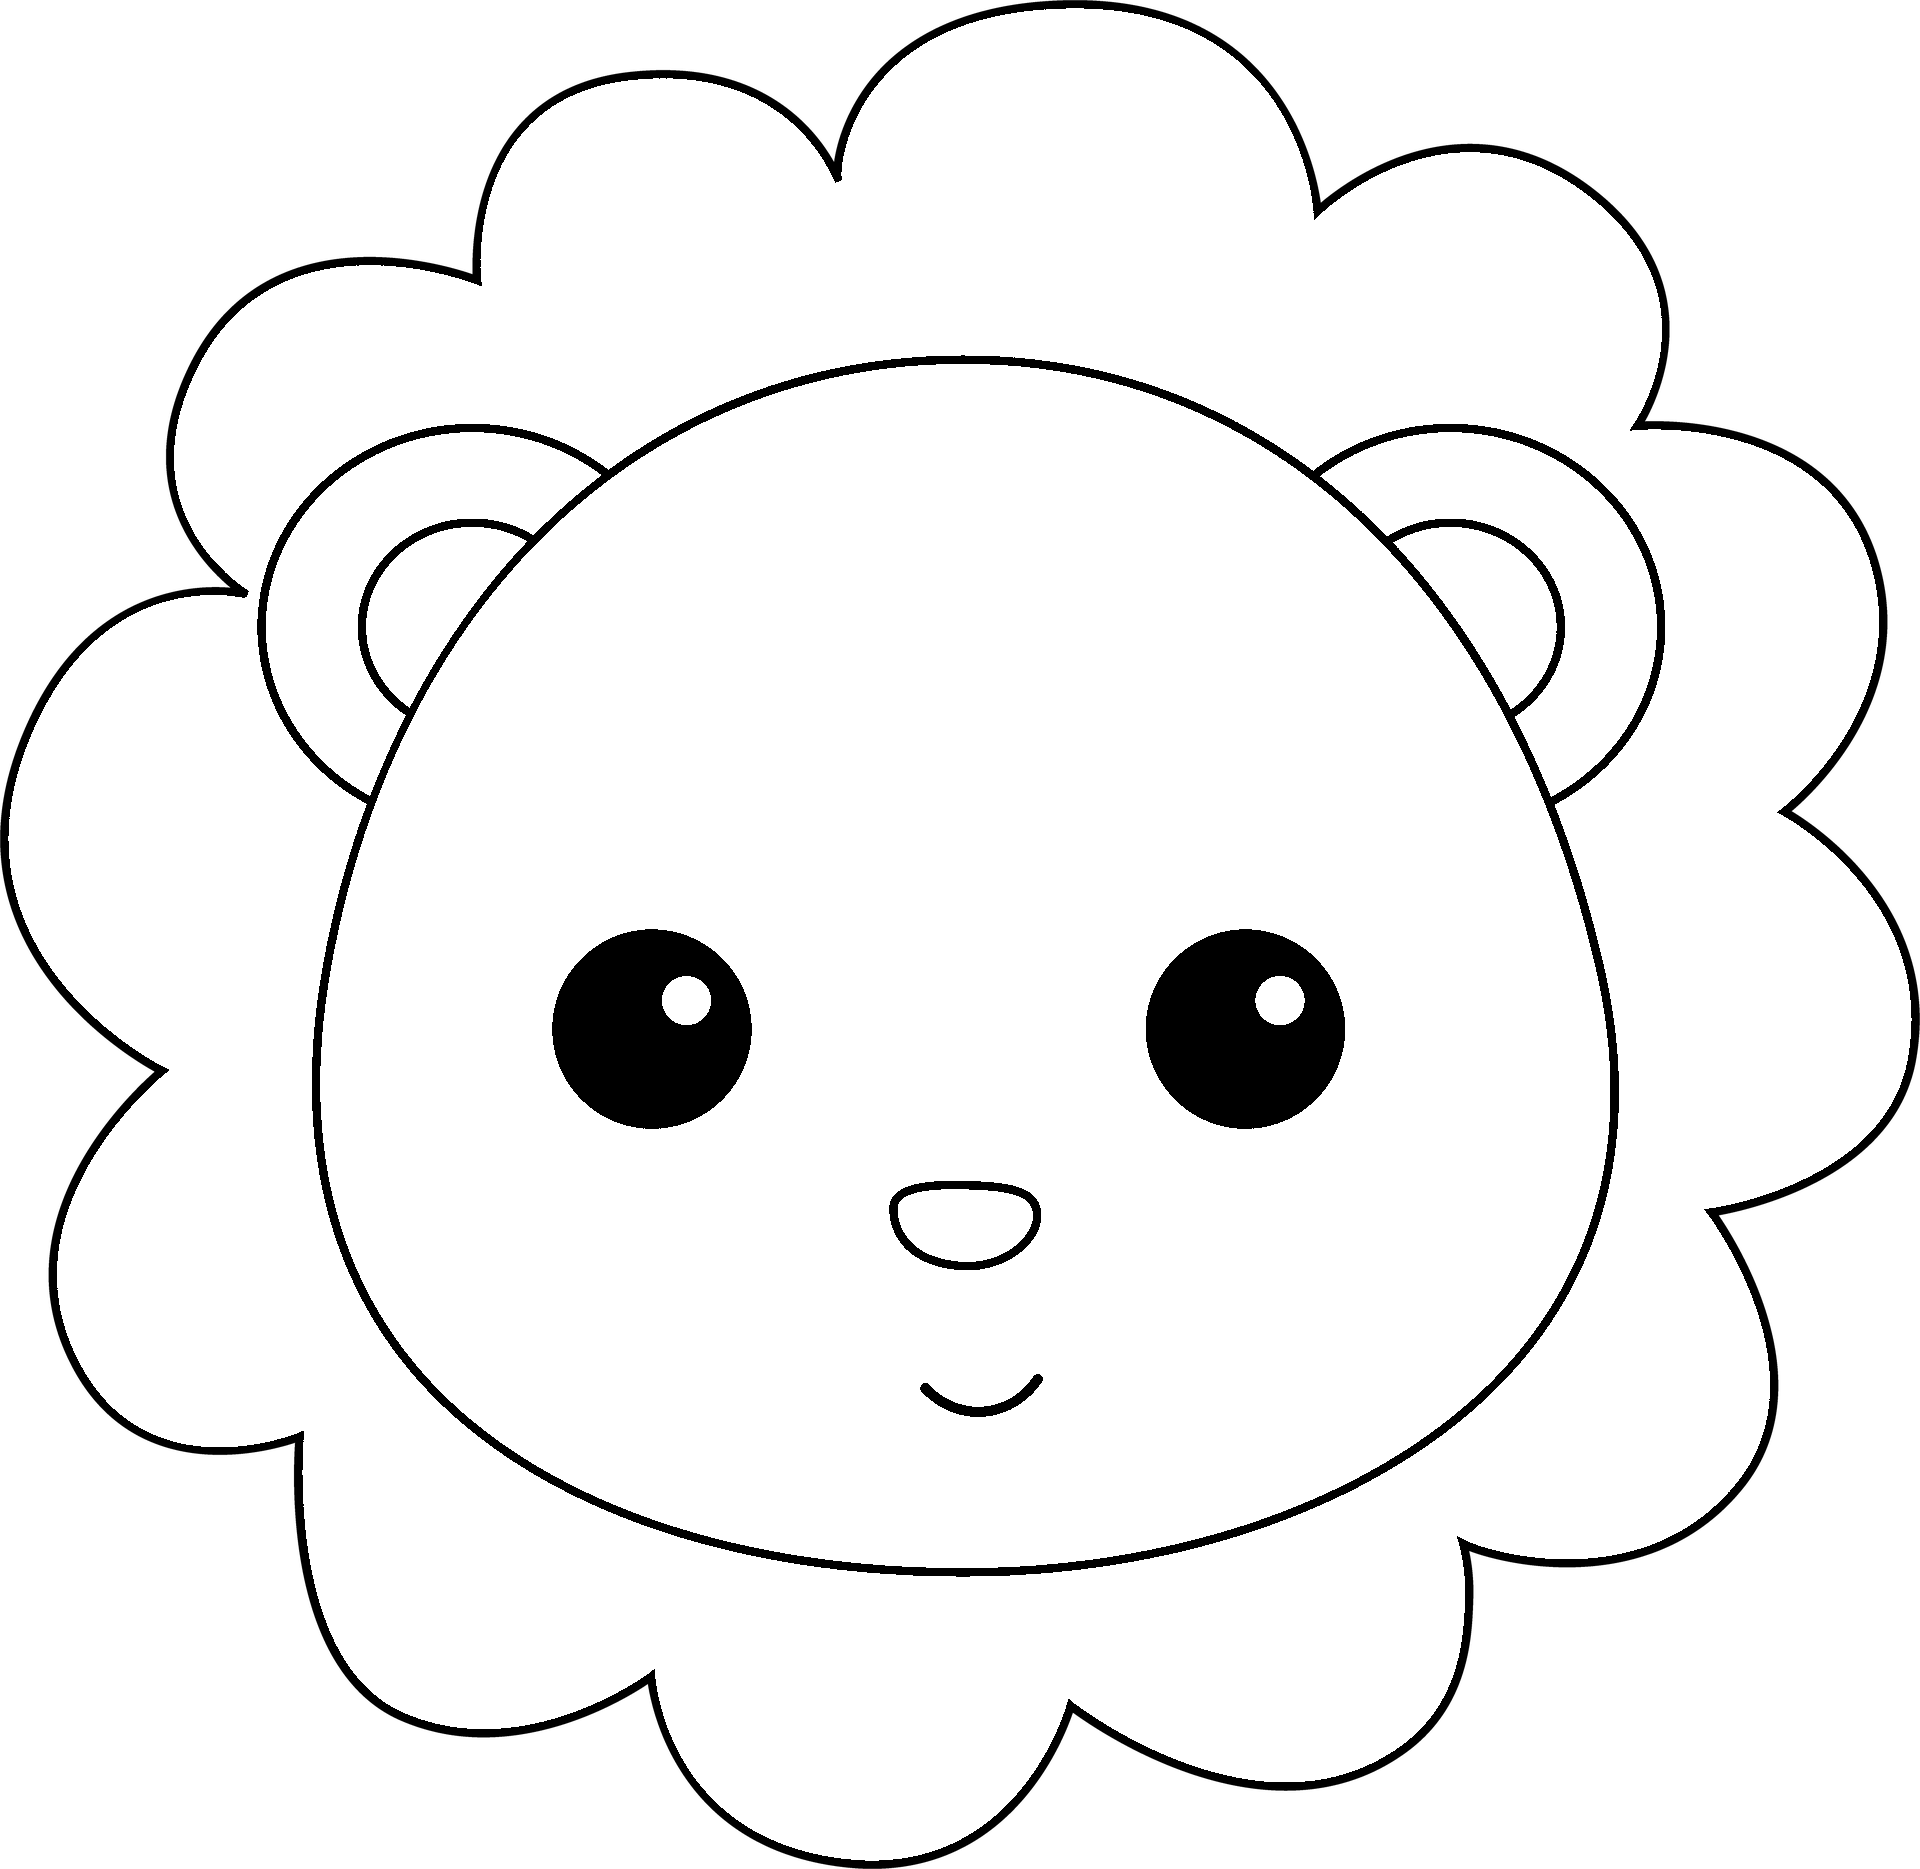 Coloring page of a lion in kawaii style